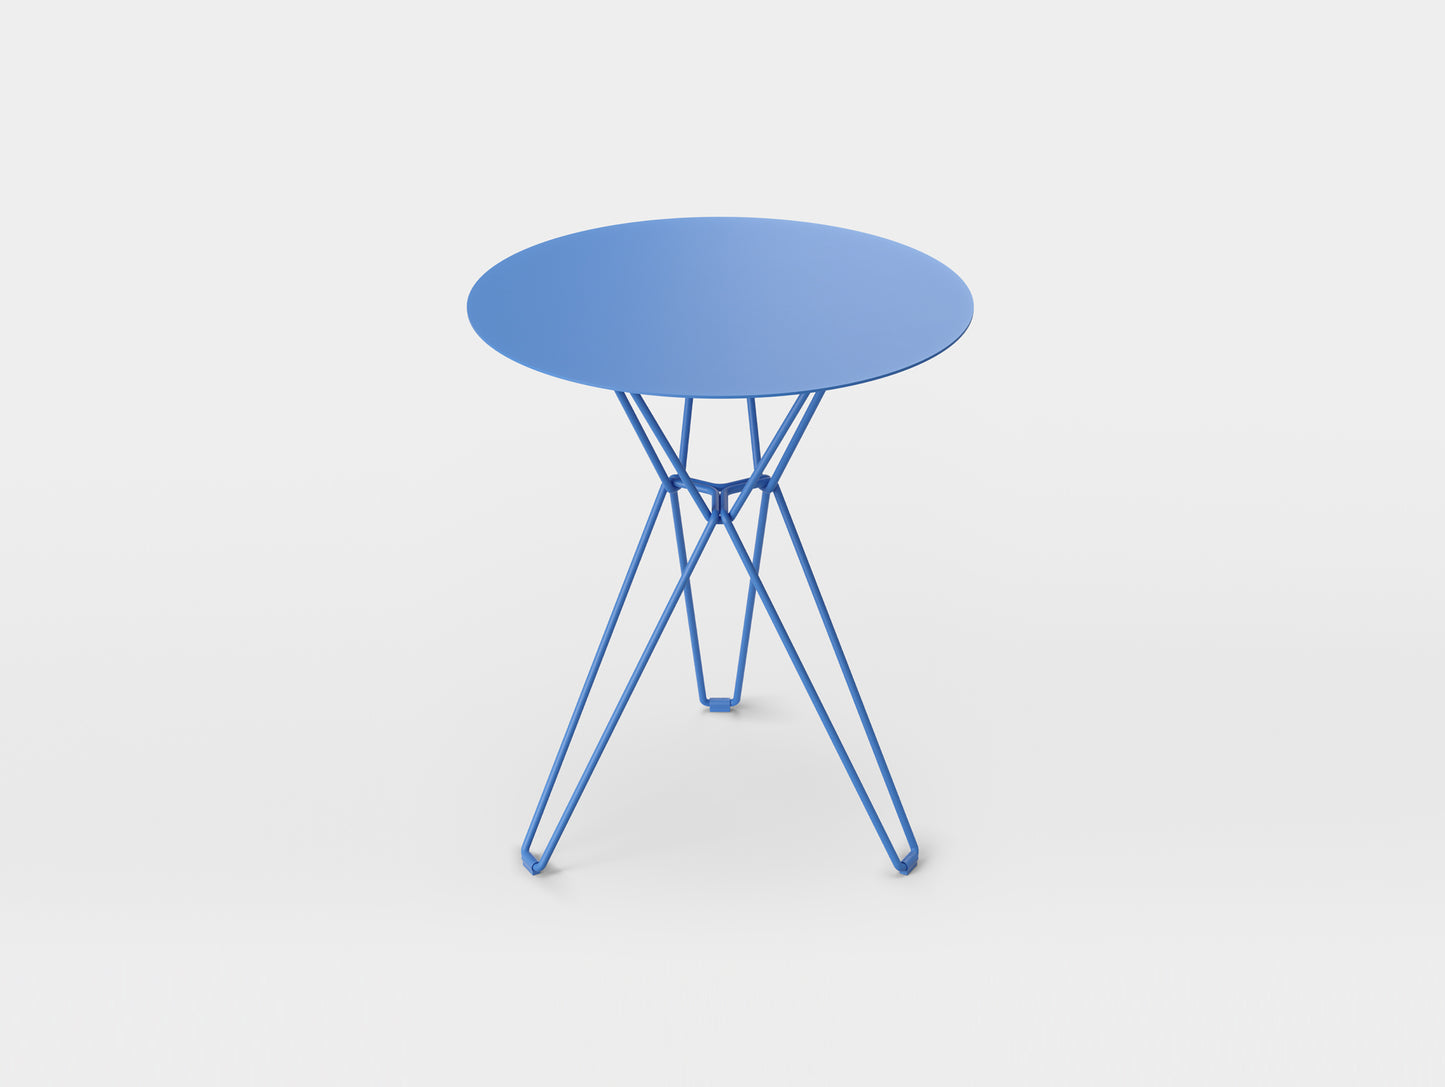 Tio Cafe Table by Massproductions - 60 cm Diameter top with 72 cm Base / Overseas Blue